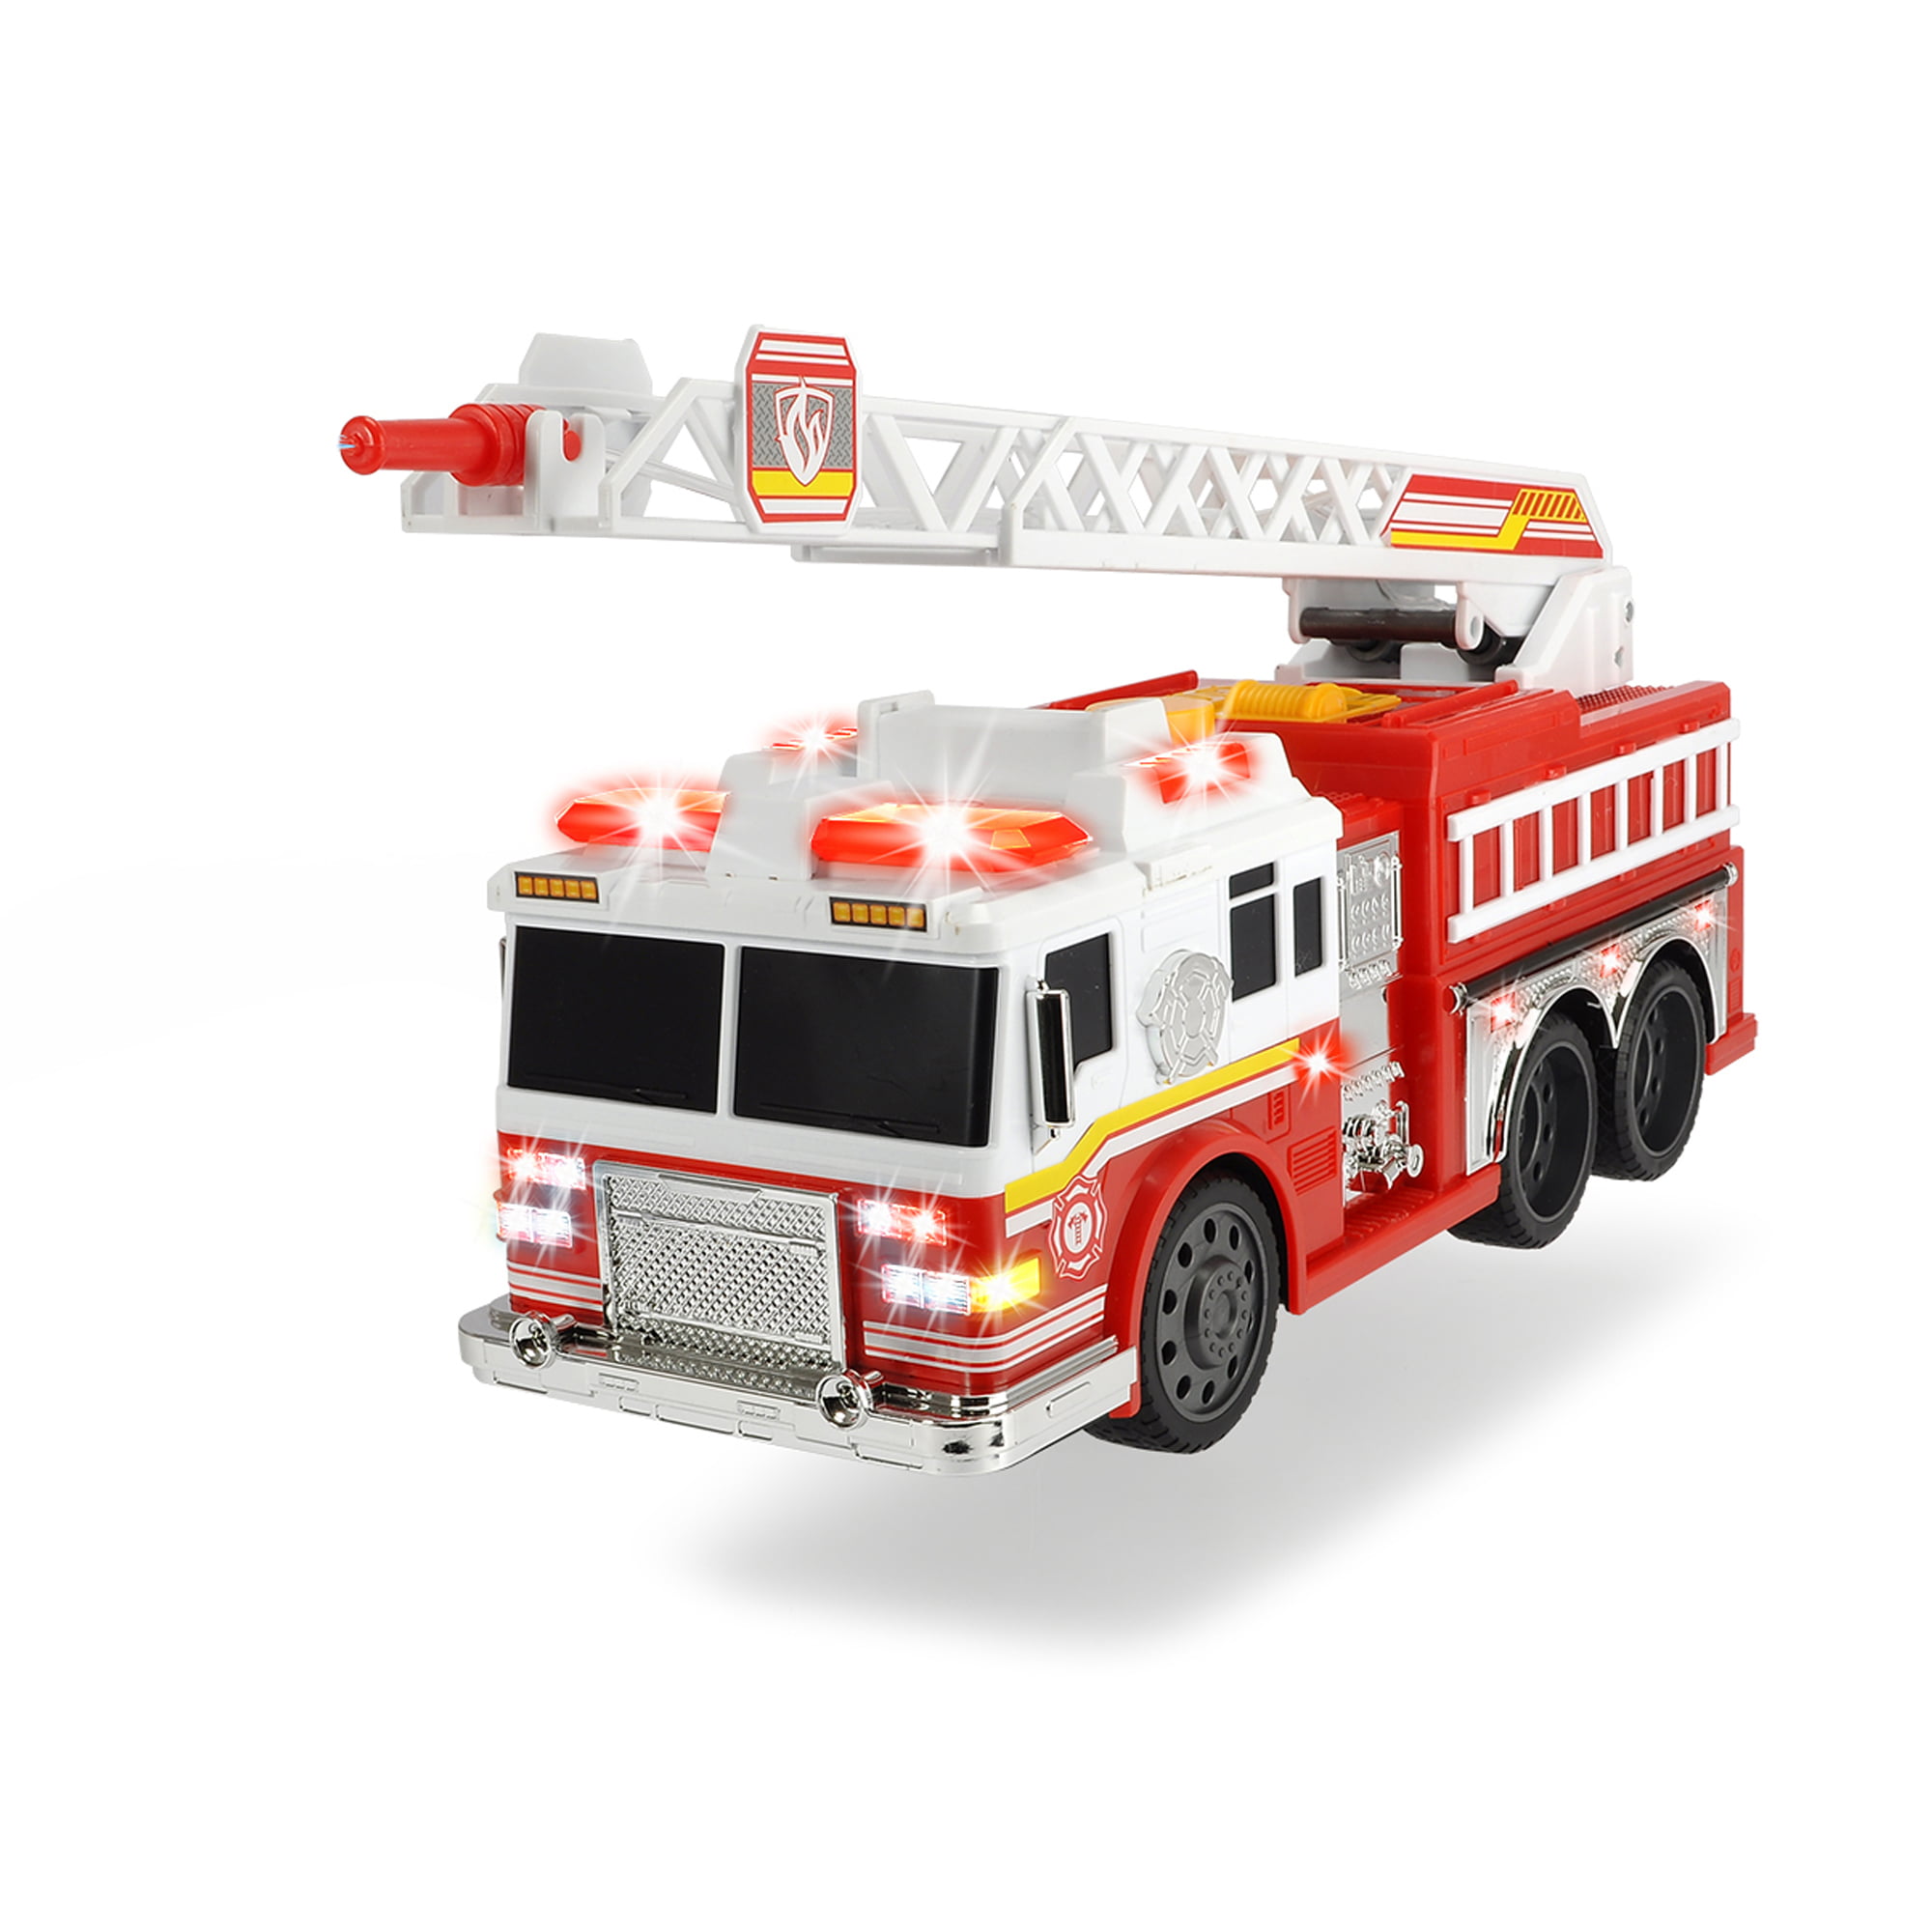 Dickie Toys Action Fire Commander